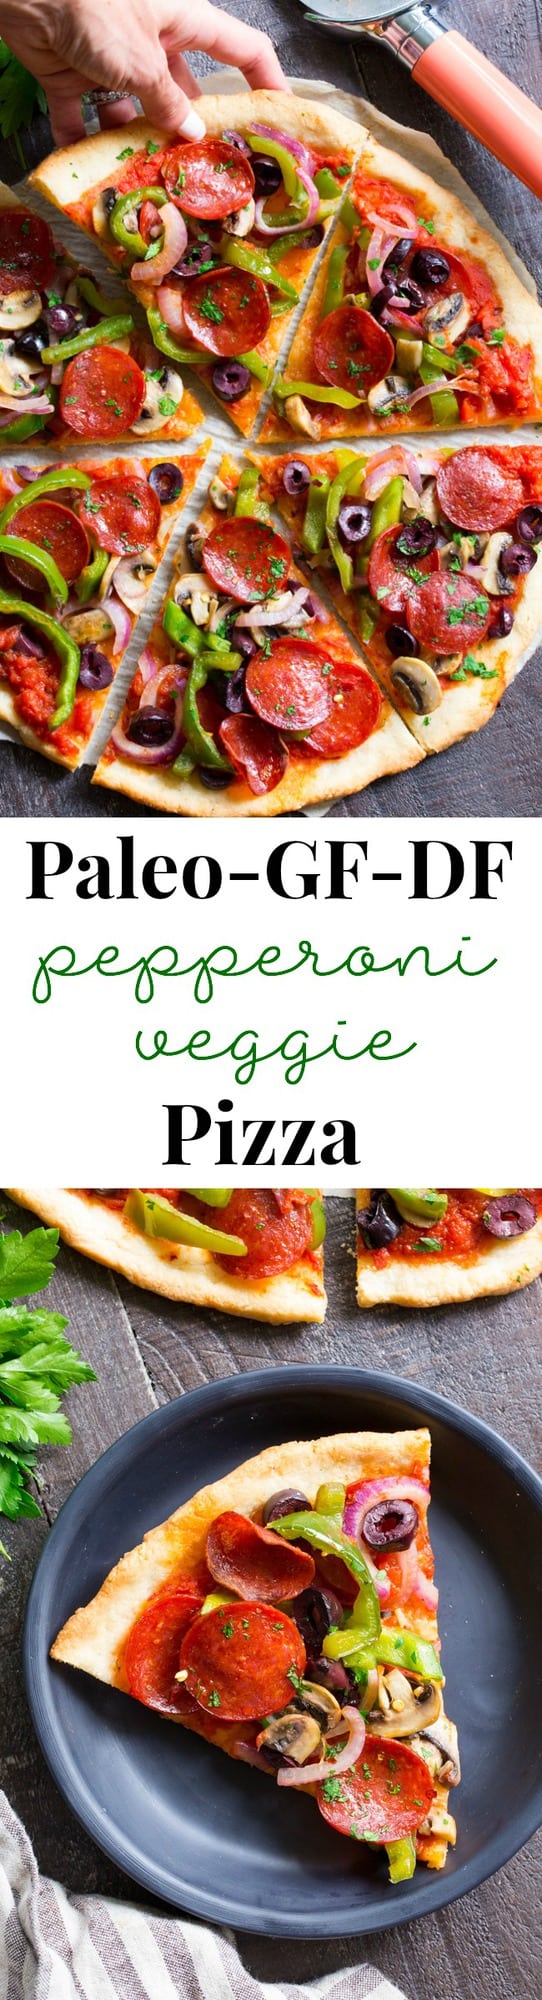 This paleo pepperoni pizza is loaded with all your favorite veggies and packed with flavor!  It's baked on the perfect paleo pizza crust and is totally dairy free, gluten free, grain free and soy free.  This healthy pizza is family approved and easy to make, too! 